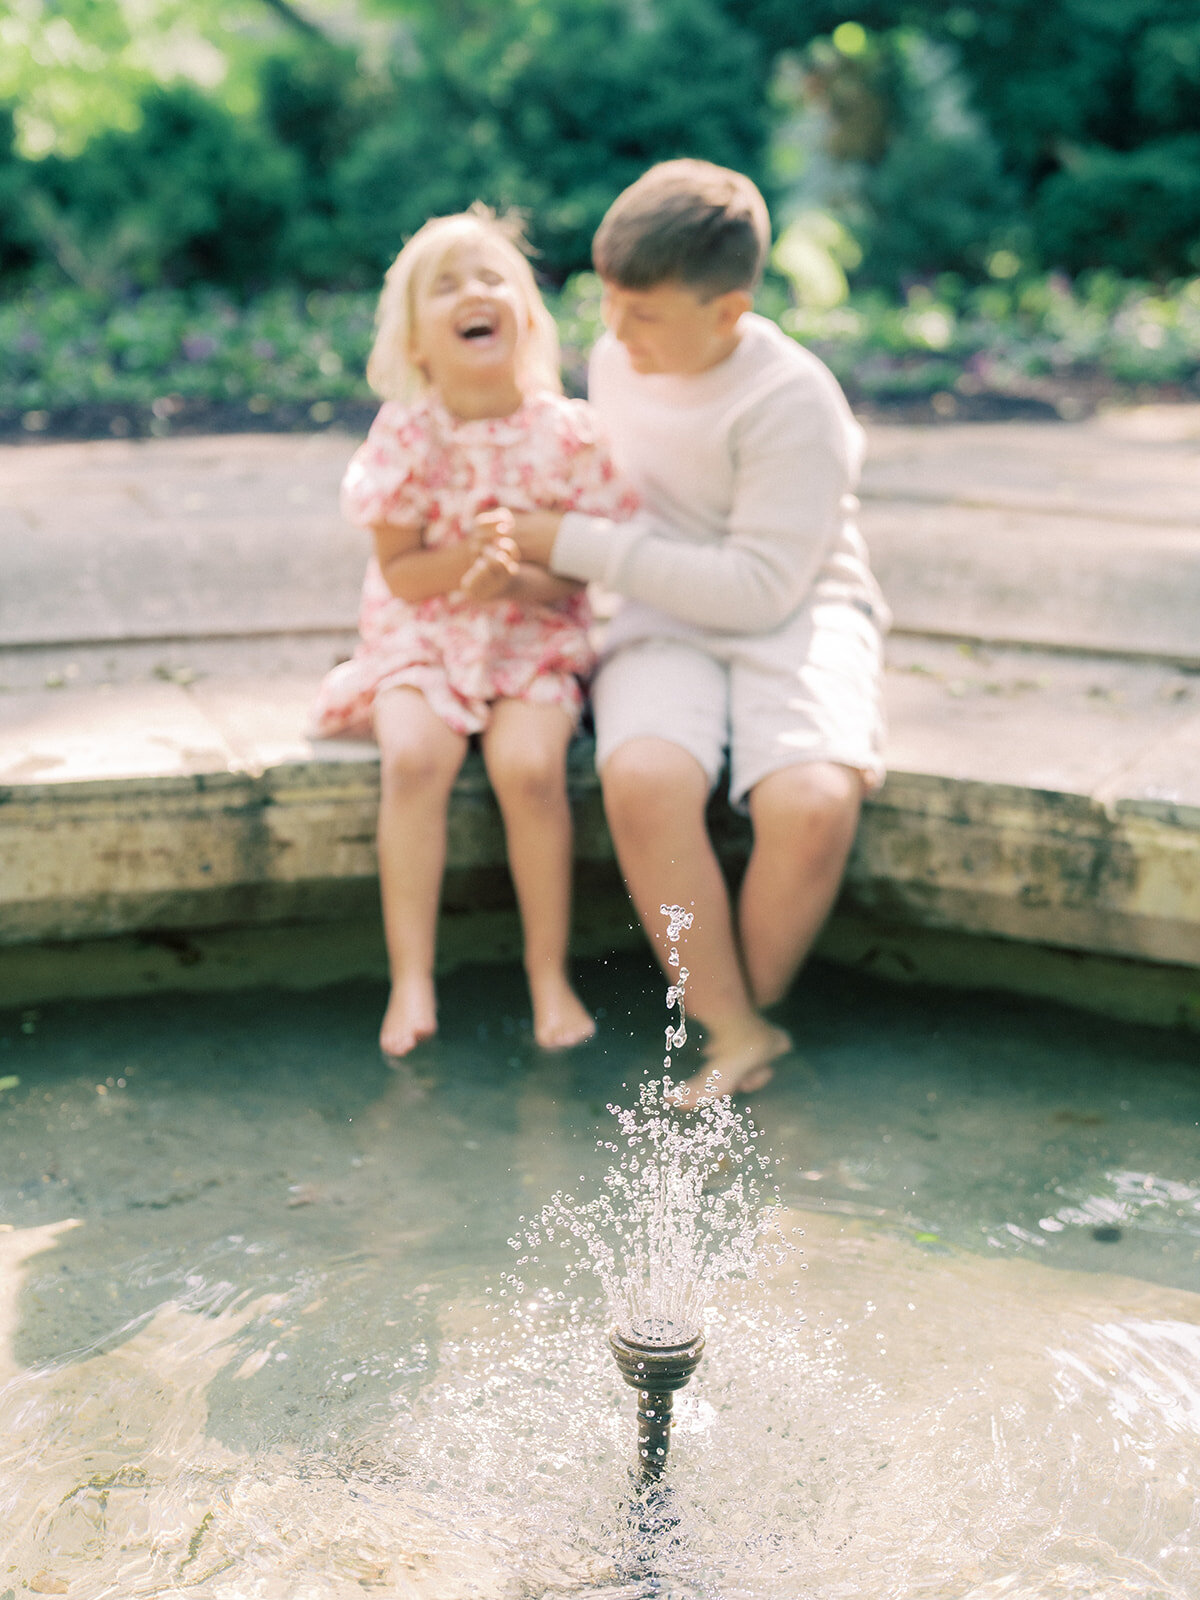 Brother and sister sit on edge of fountain with feet dipping in, laughing.